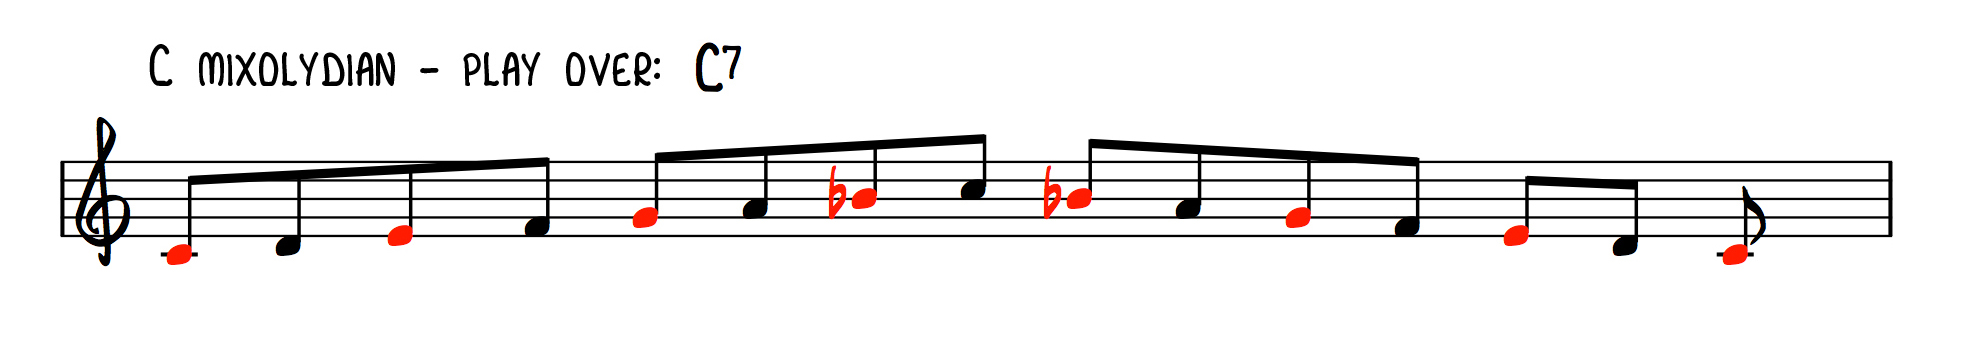 The Mixolydian Mode